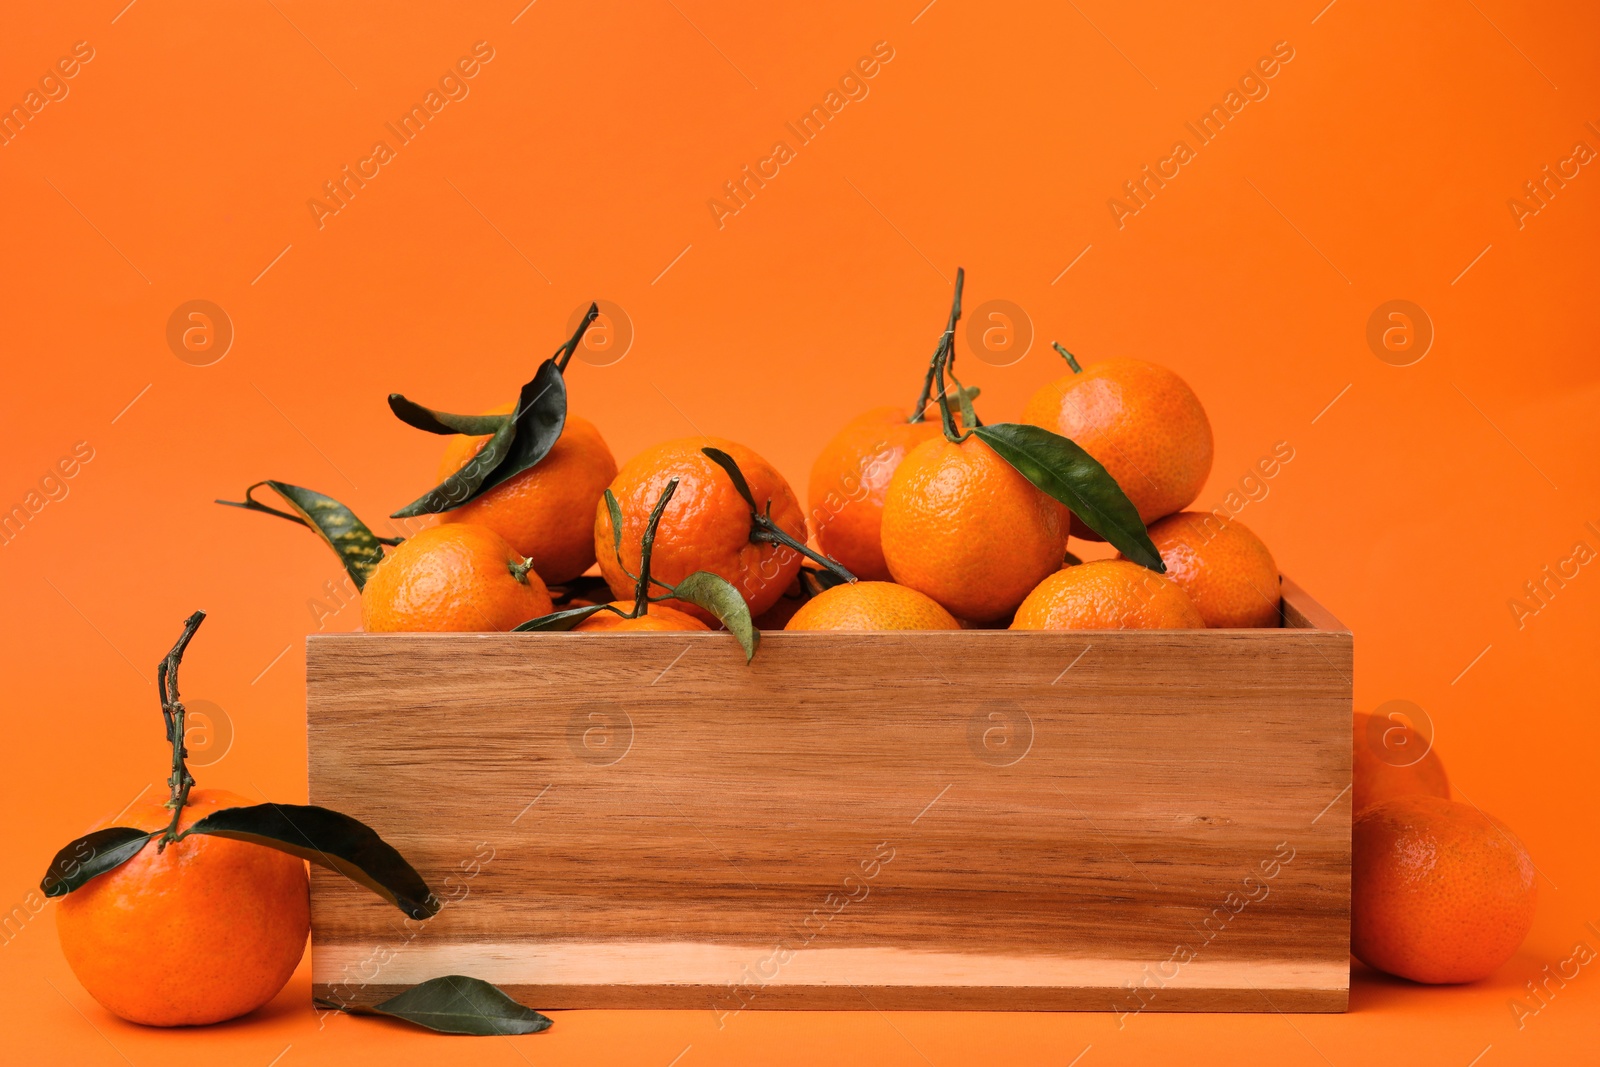 Photo of Wooden crate with fresh ripe tangerines and leaves on orange table